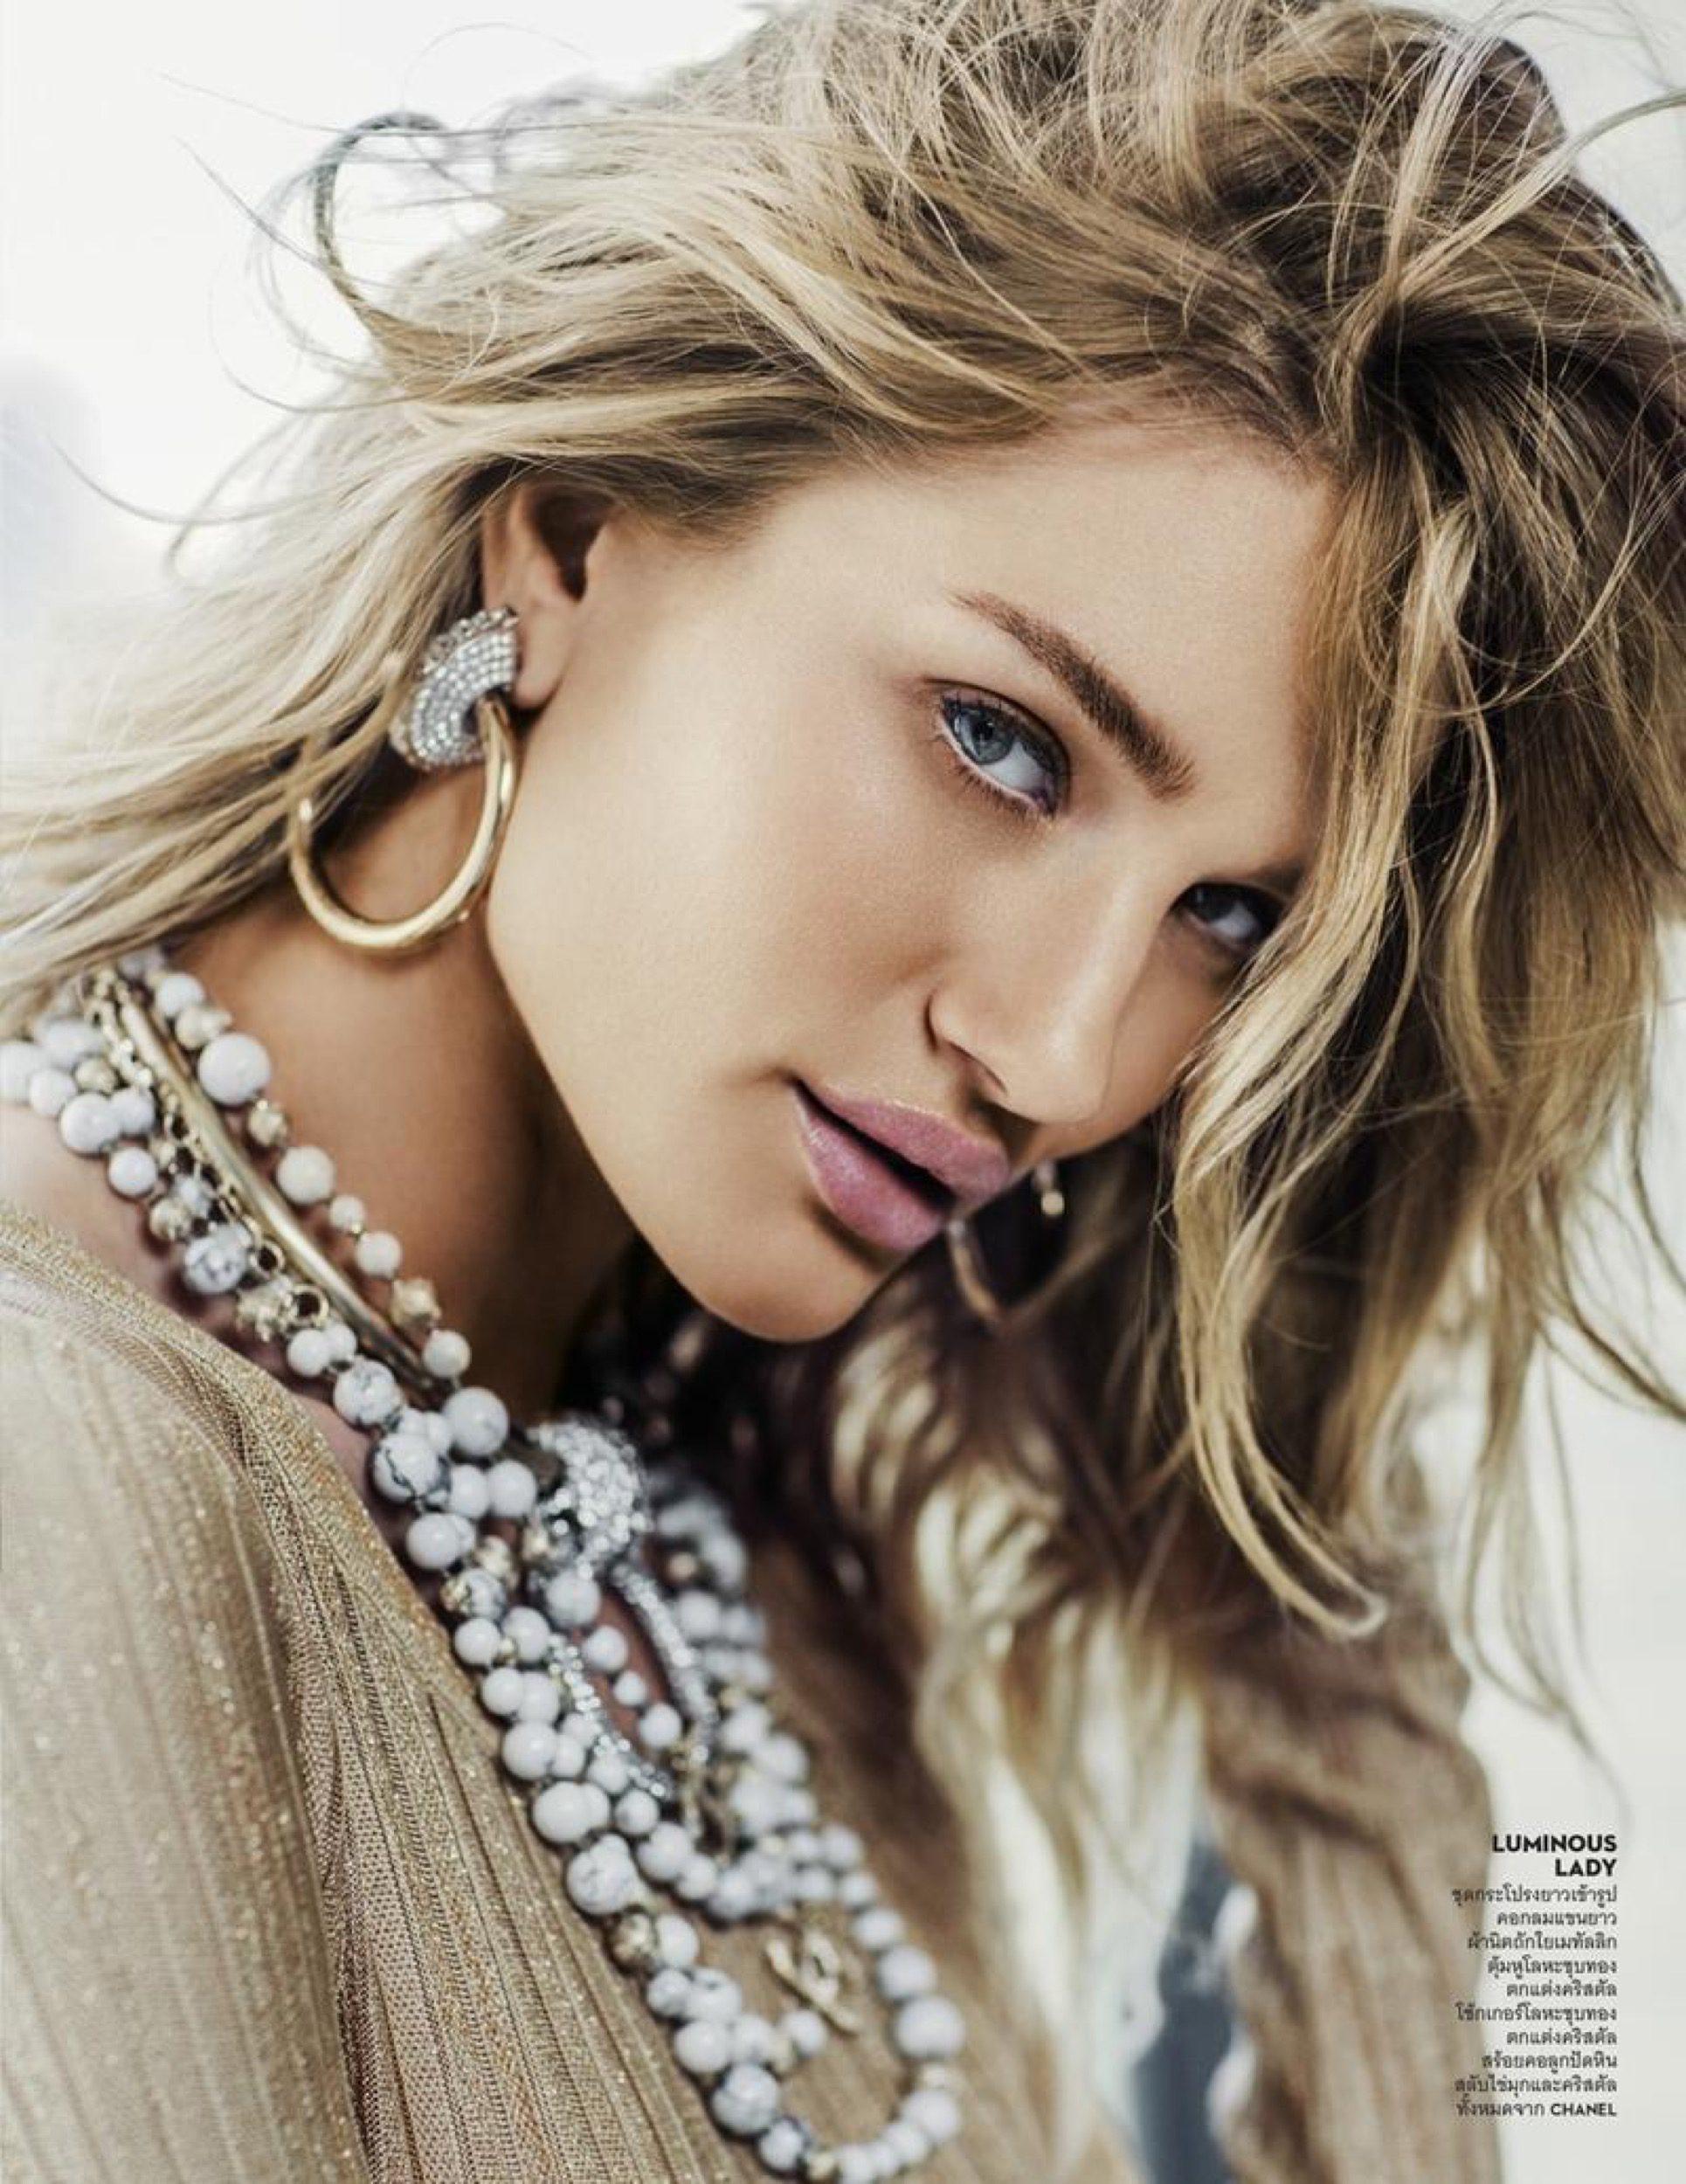 kathrin-hohberg-vogue-thailand-july16-rosie-huntington-whiteley-russell-james-03